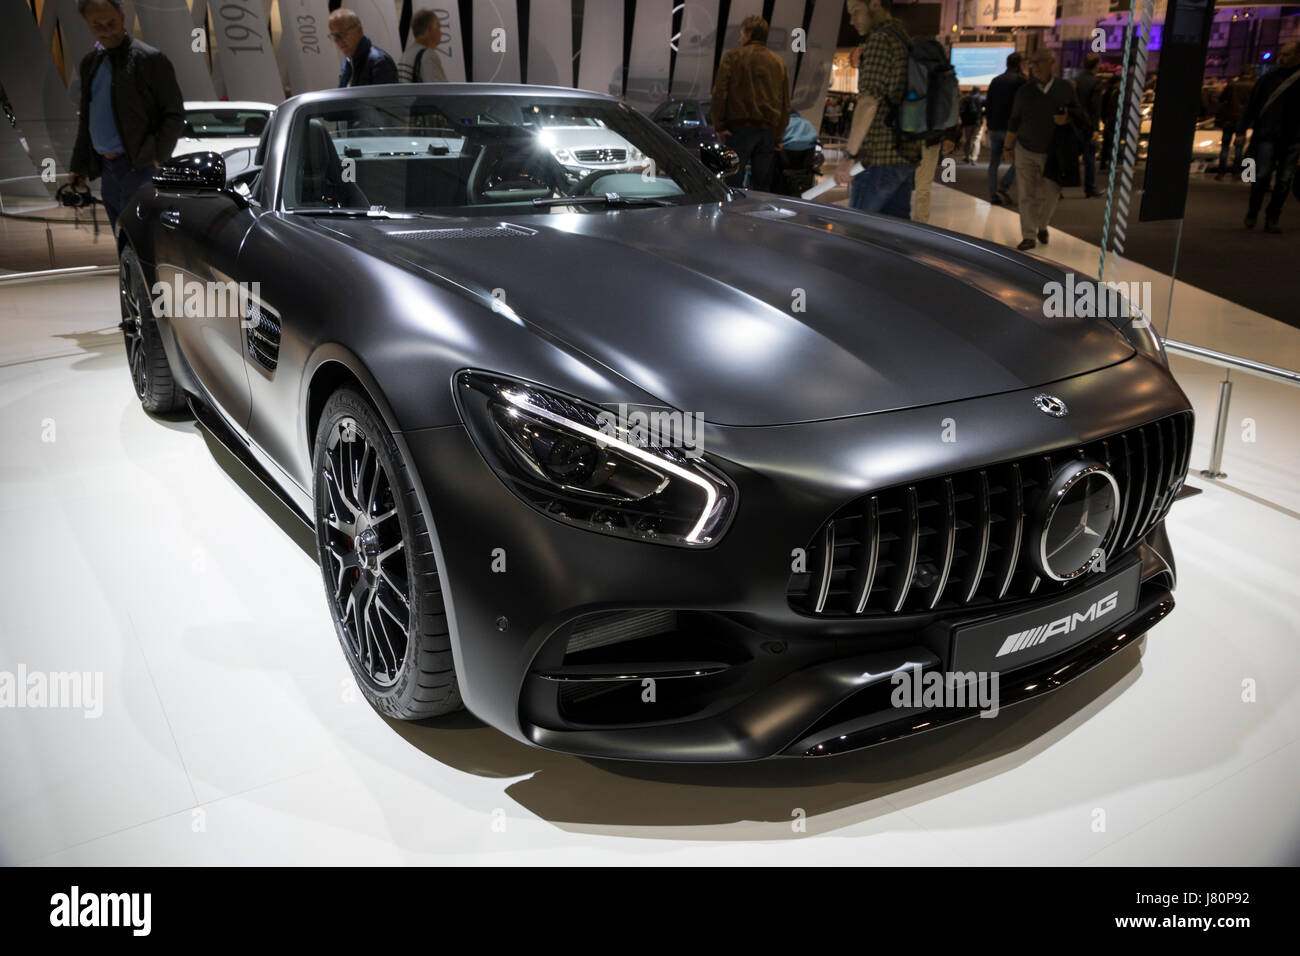 ESSEN, GERMANY - APR 6, 2017: New 2017 Mercedes Benz AMG GT 50 Edition sports car at the Techno Classica Essen Car Show. Stock Photo